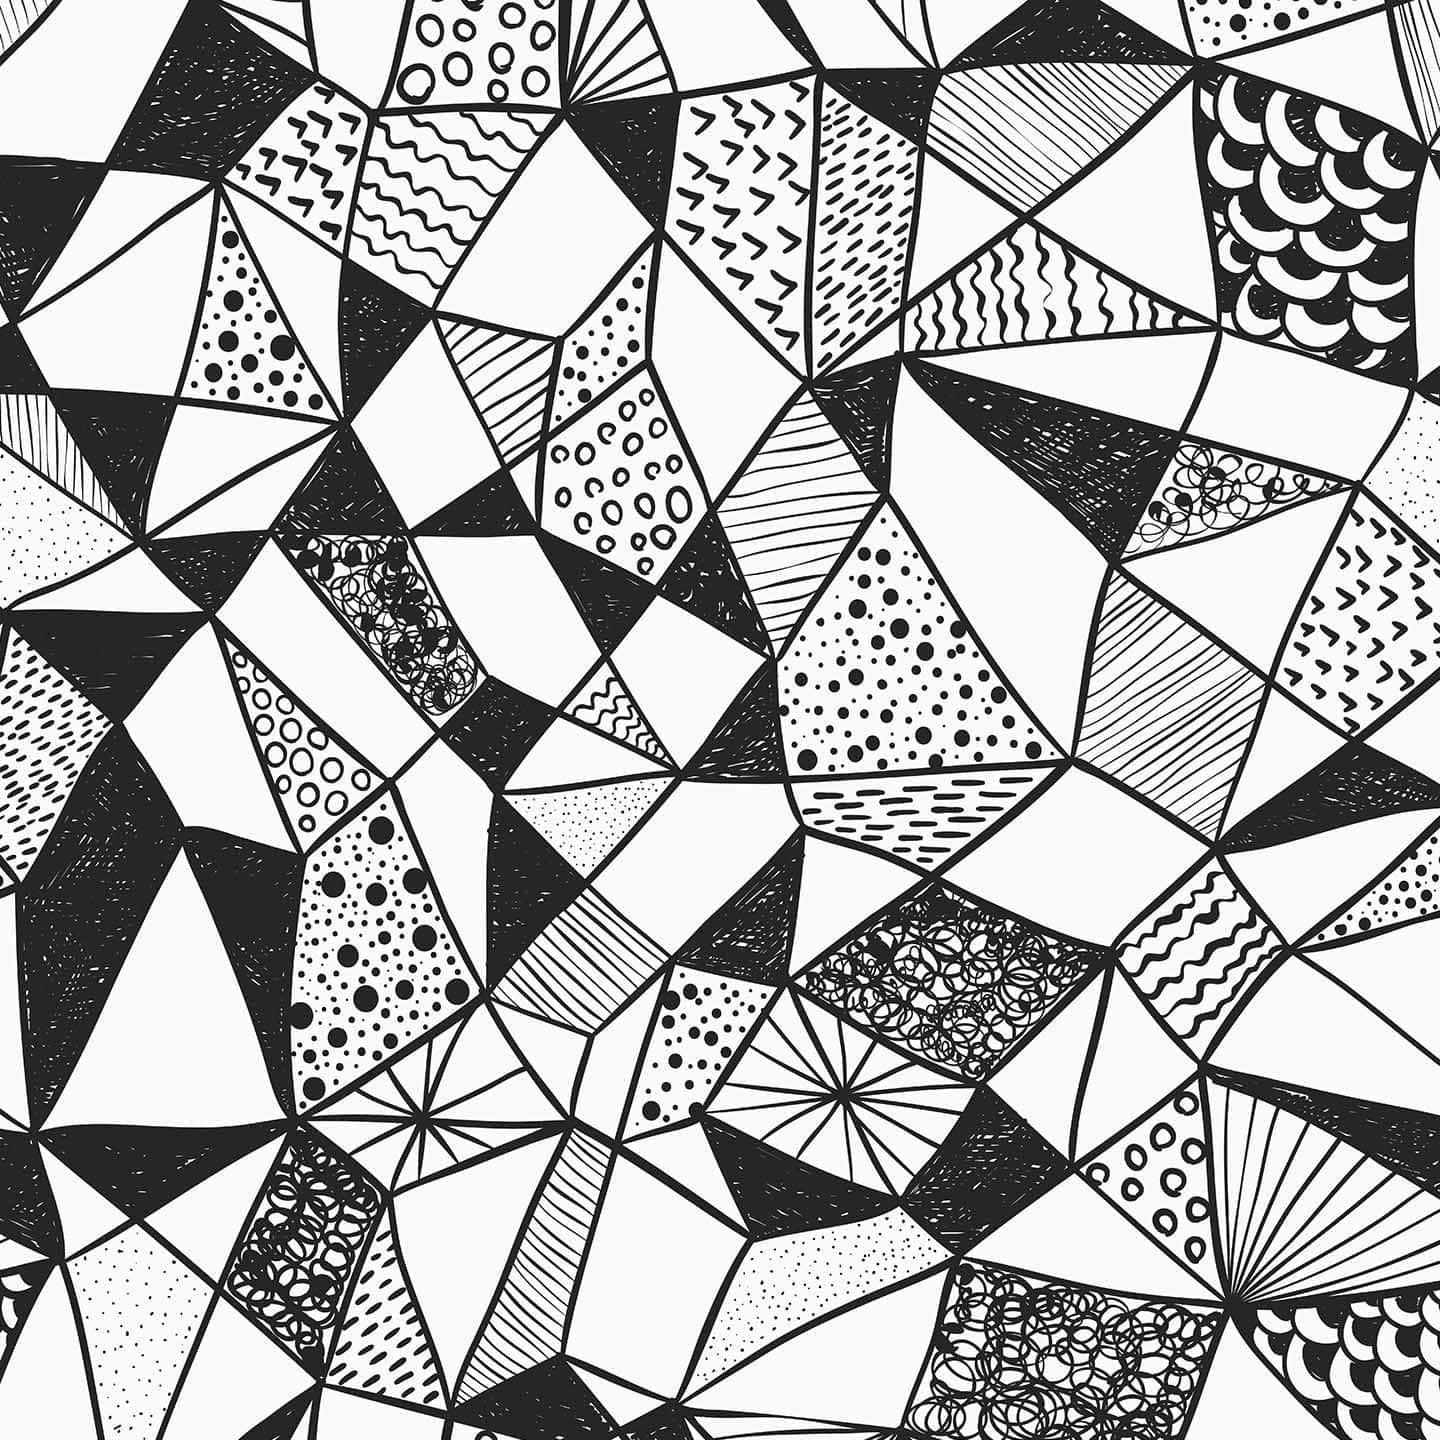 Captivating Geometric Pattern in Black and White Wallpaper